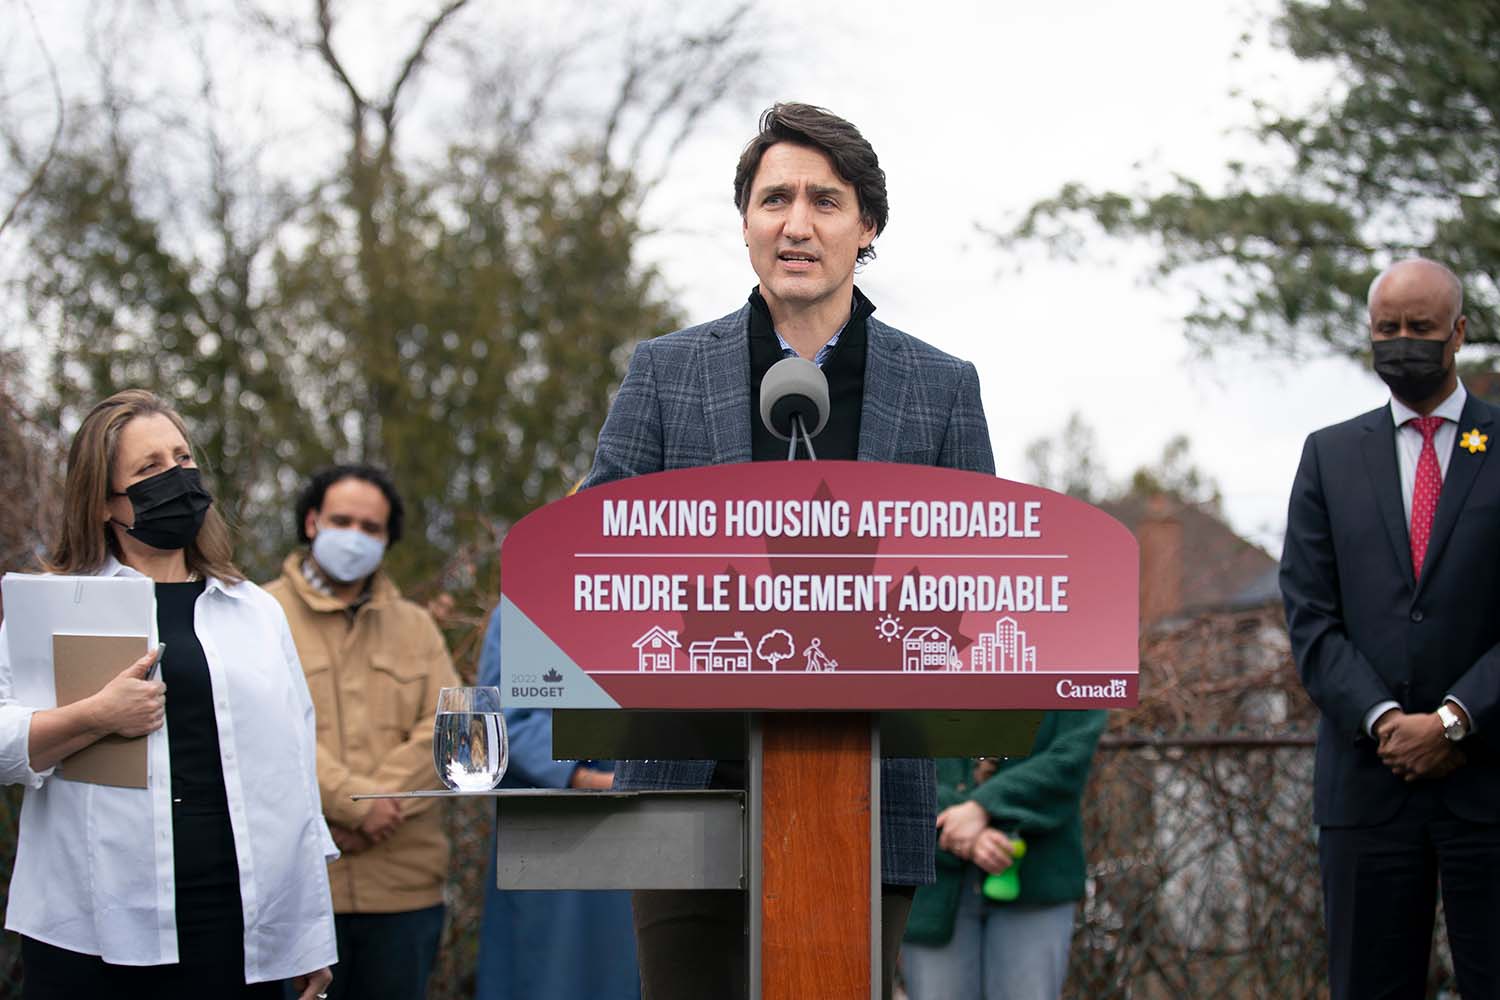 Justin Trudeau stands outside at a podium which says 'Making Housing Affordable / Rendre Le Logement Abordable.' Chrystia Freeland and several other staffers stand around him, wearing masks due to the COVID-19 pandemic.